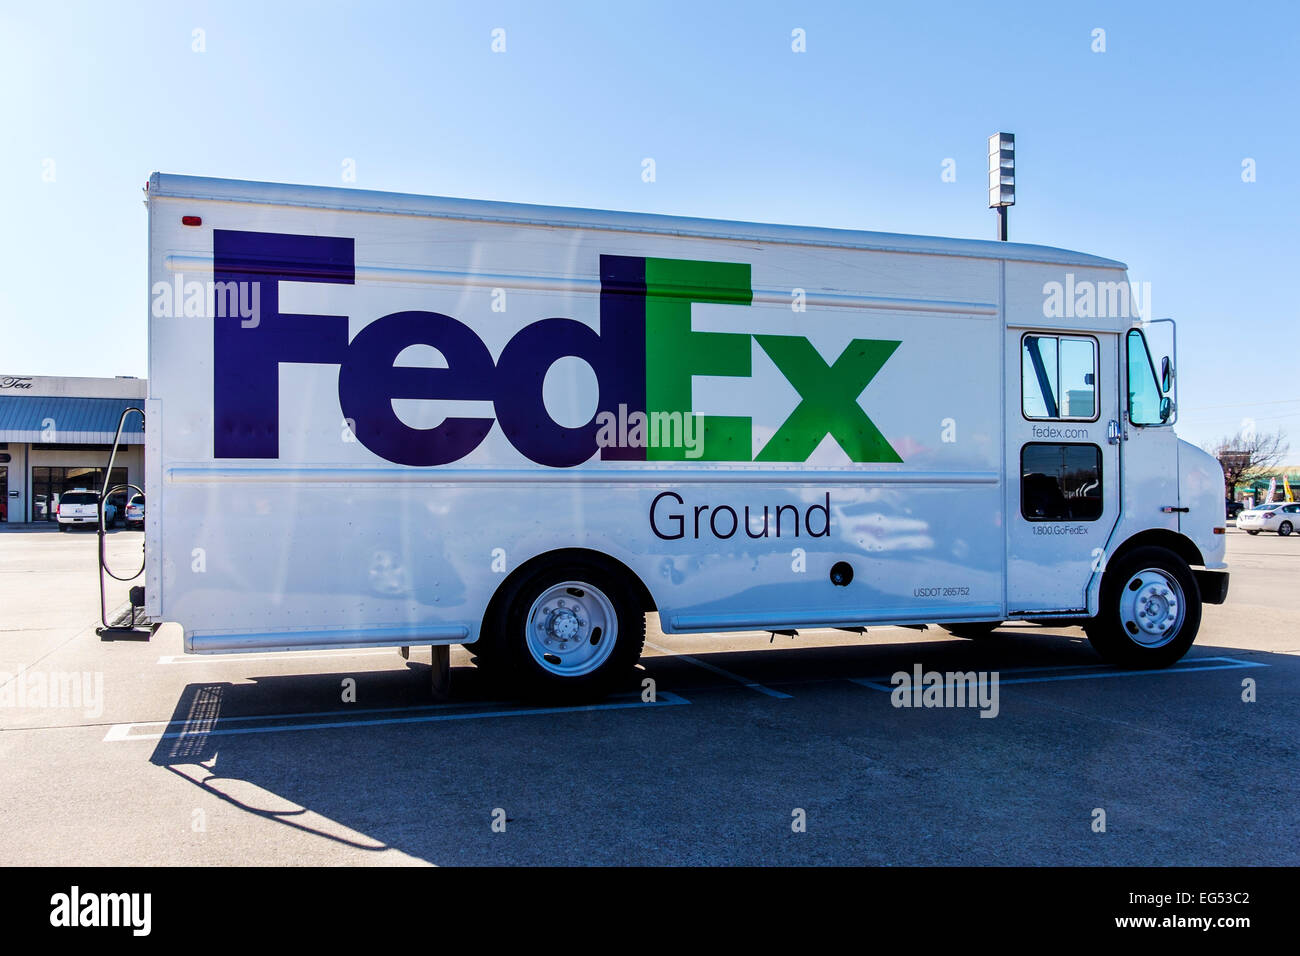 A FedEx delivery truck parked in a parking lot. Stock Photo